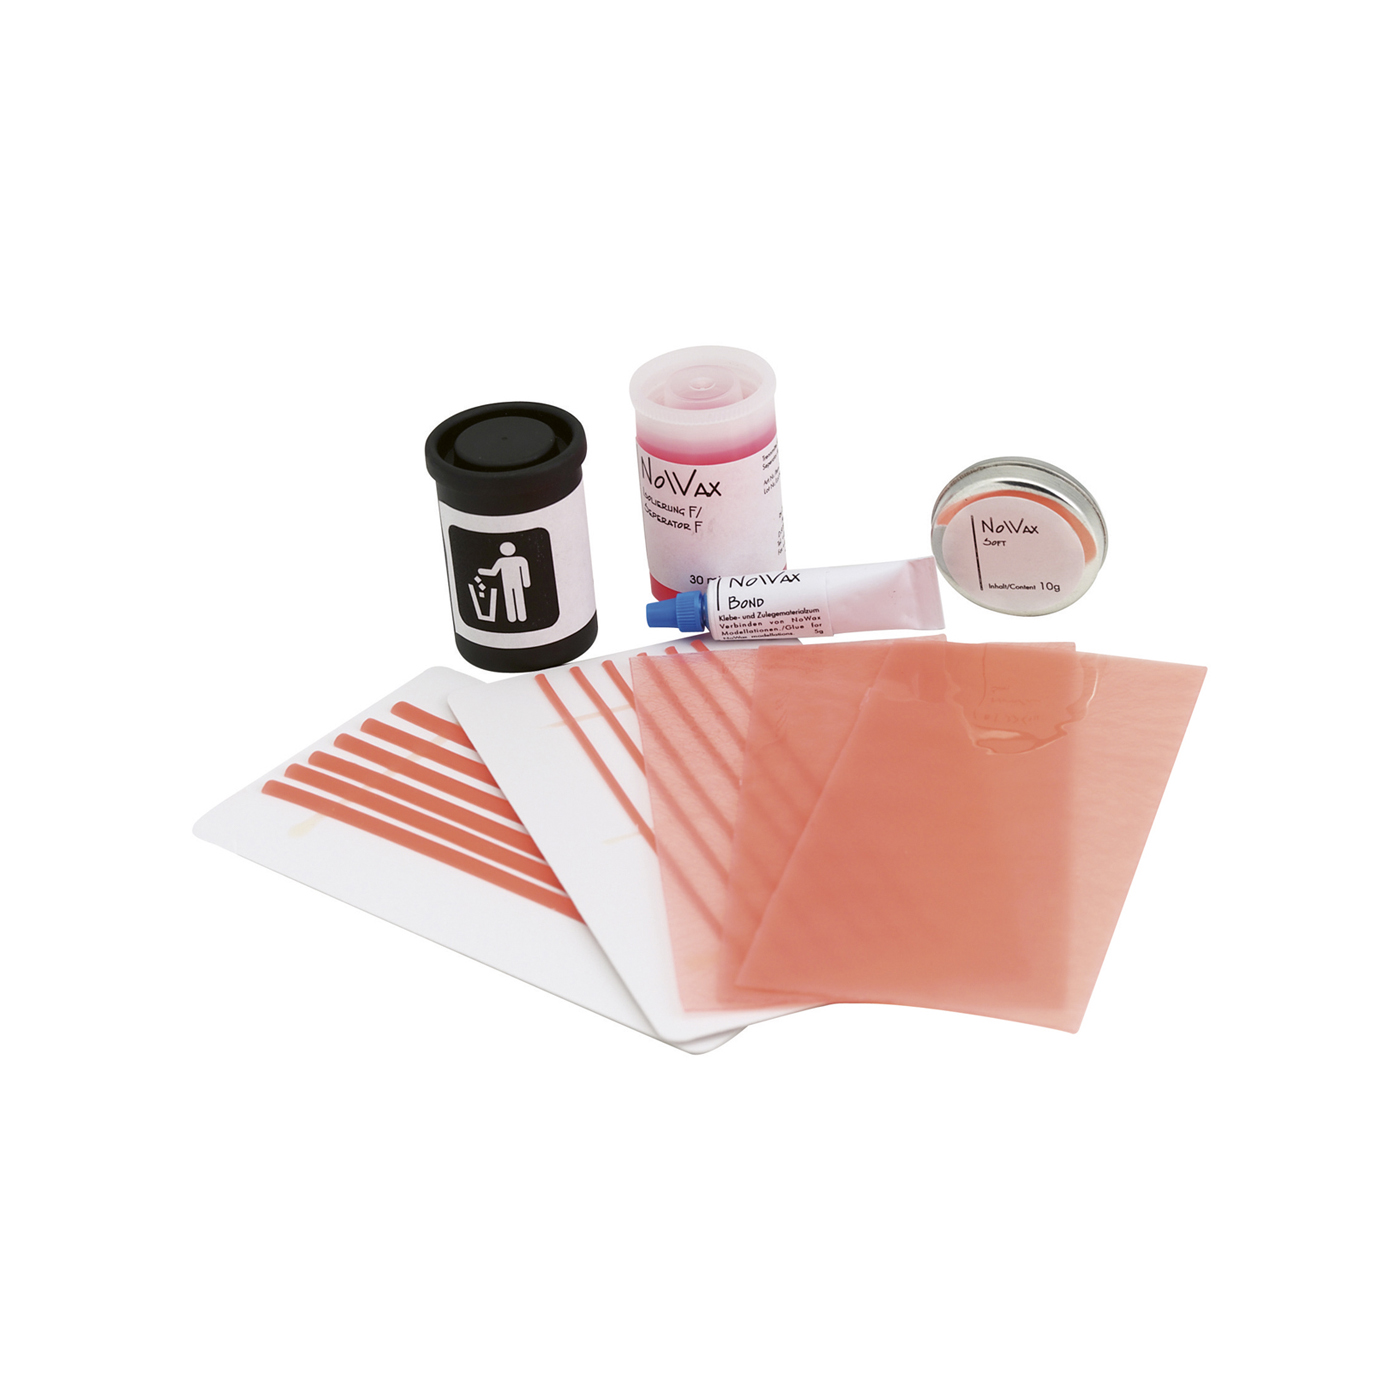 NoWax Modelling Material Start-Up Kit - 1 piece